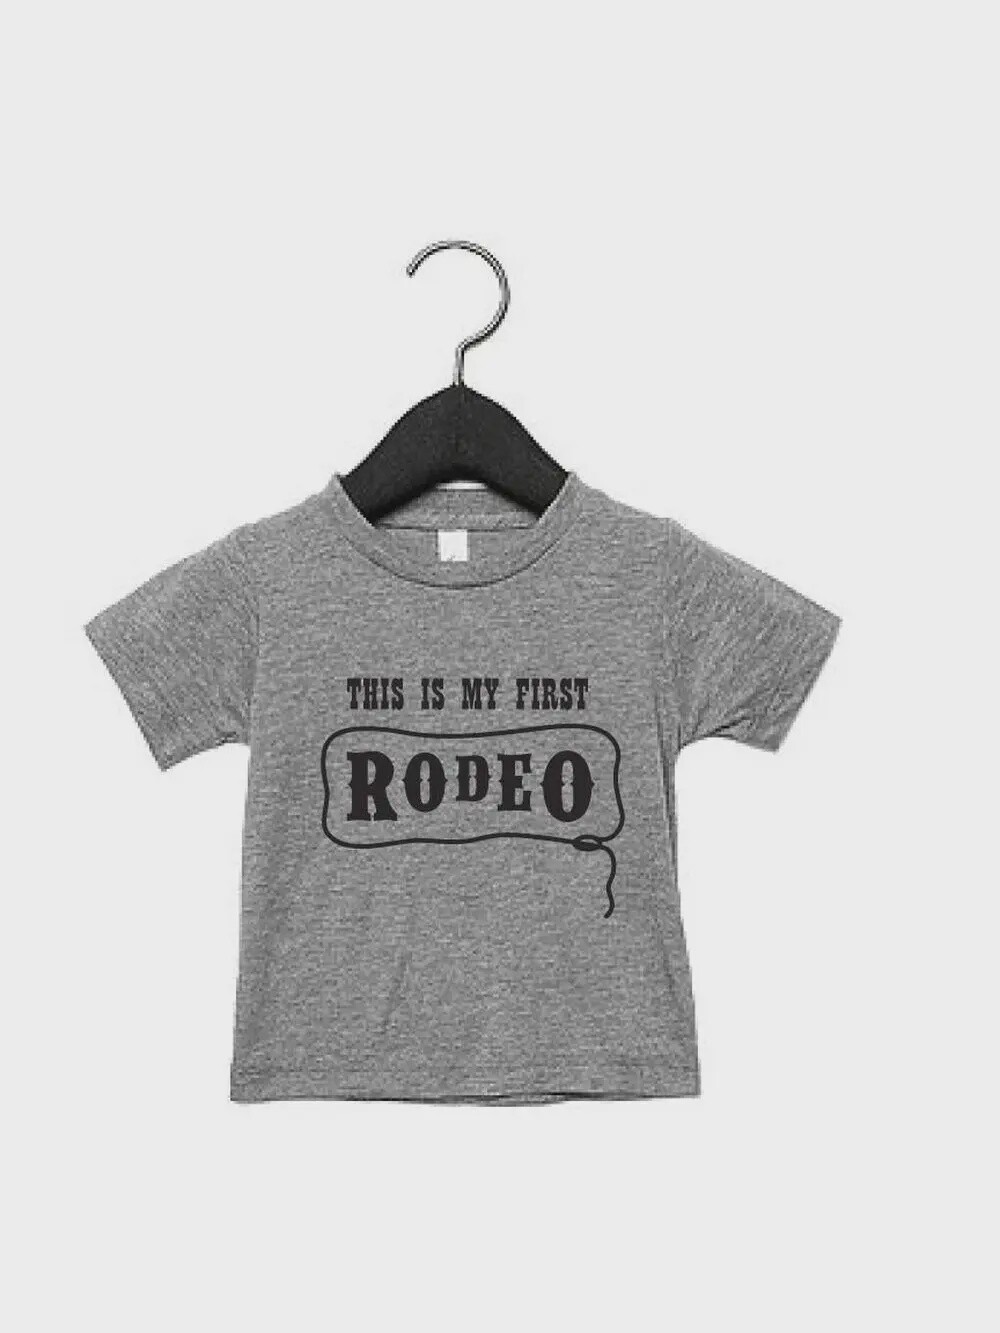 This Is My First Rodeo Tee